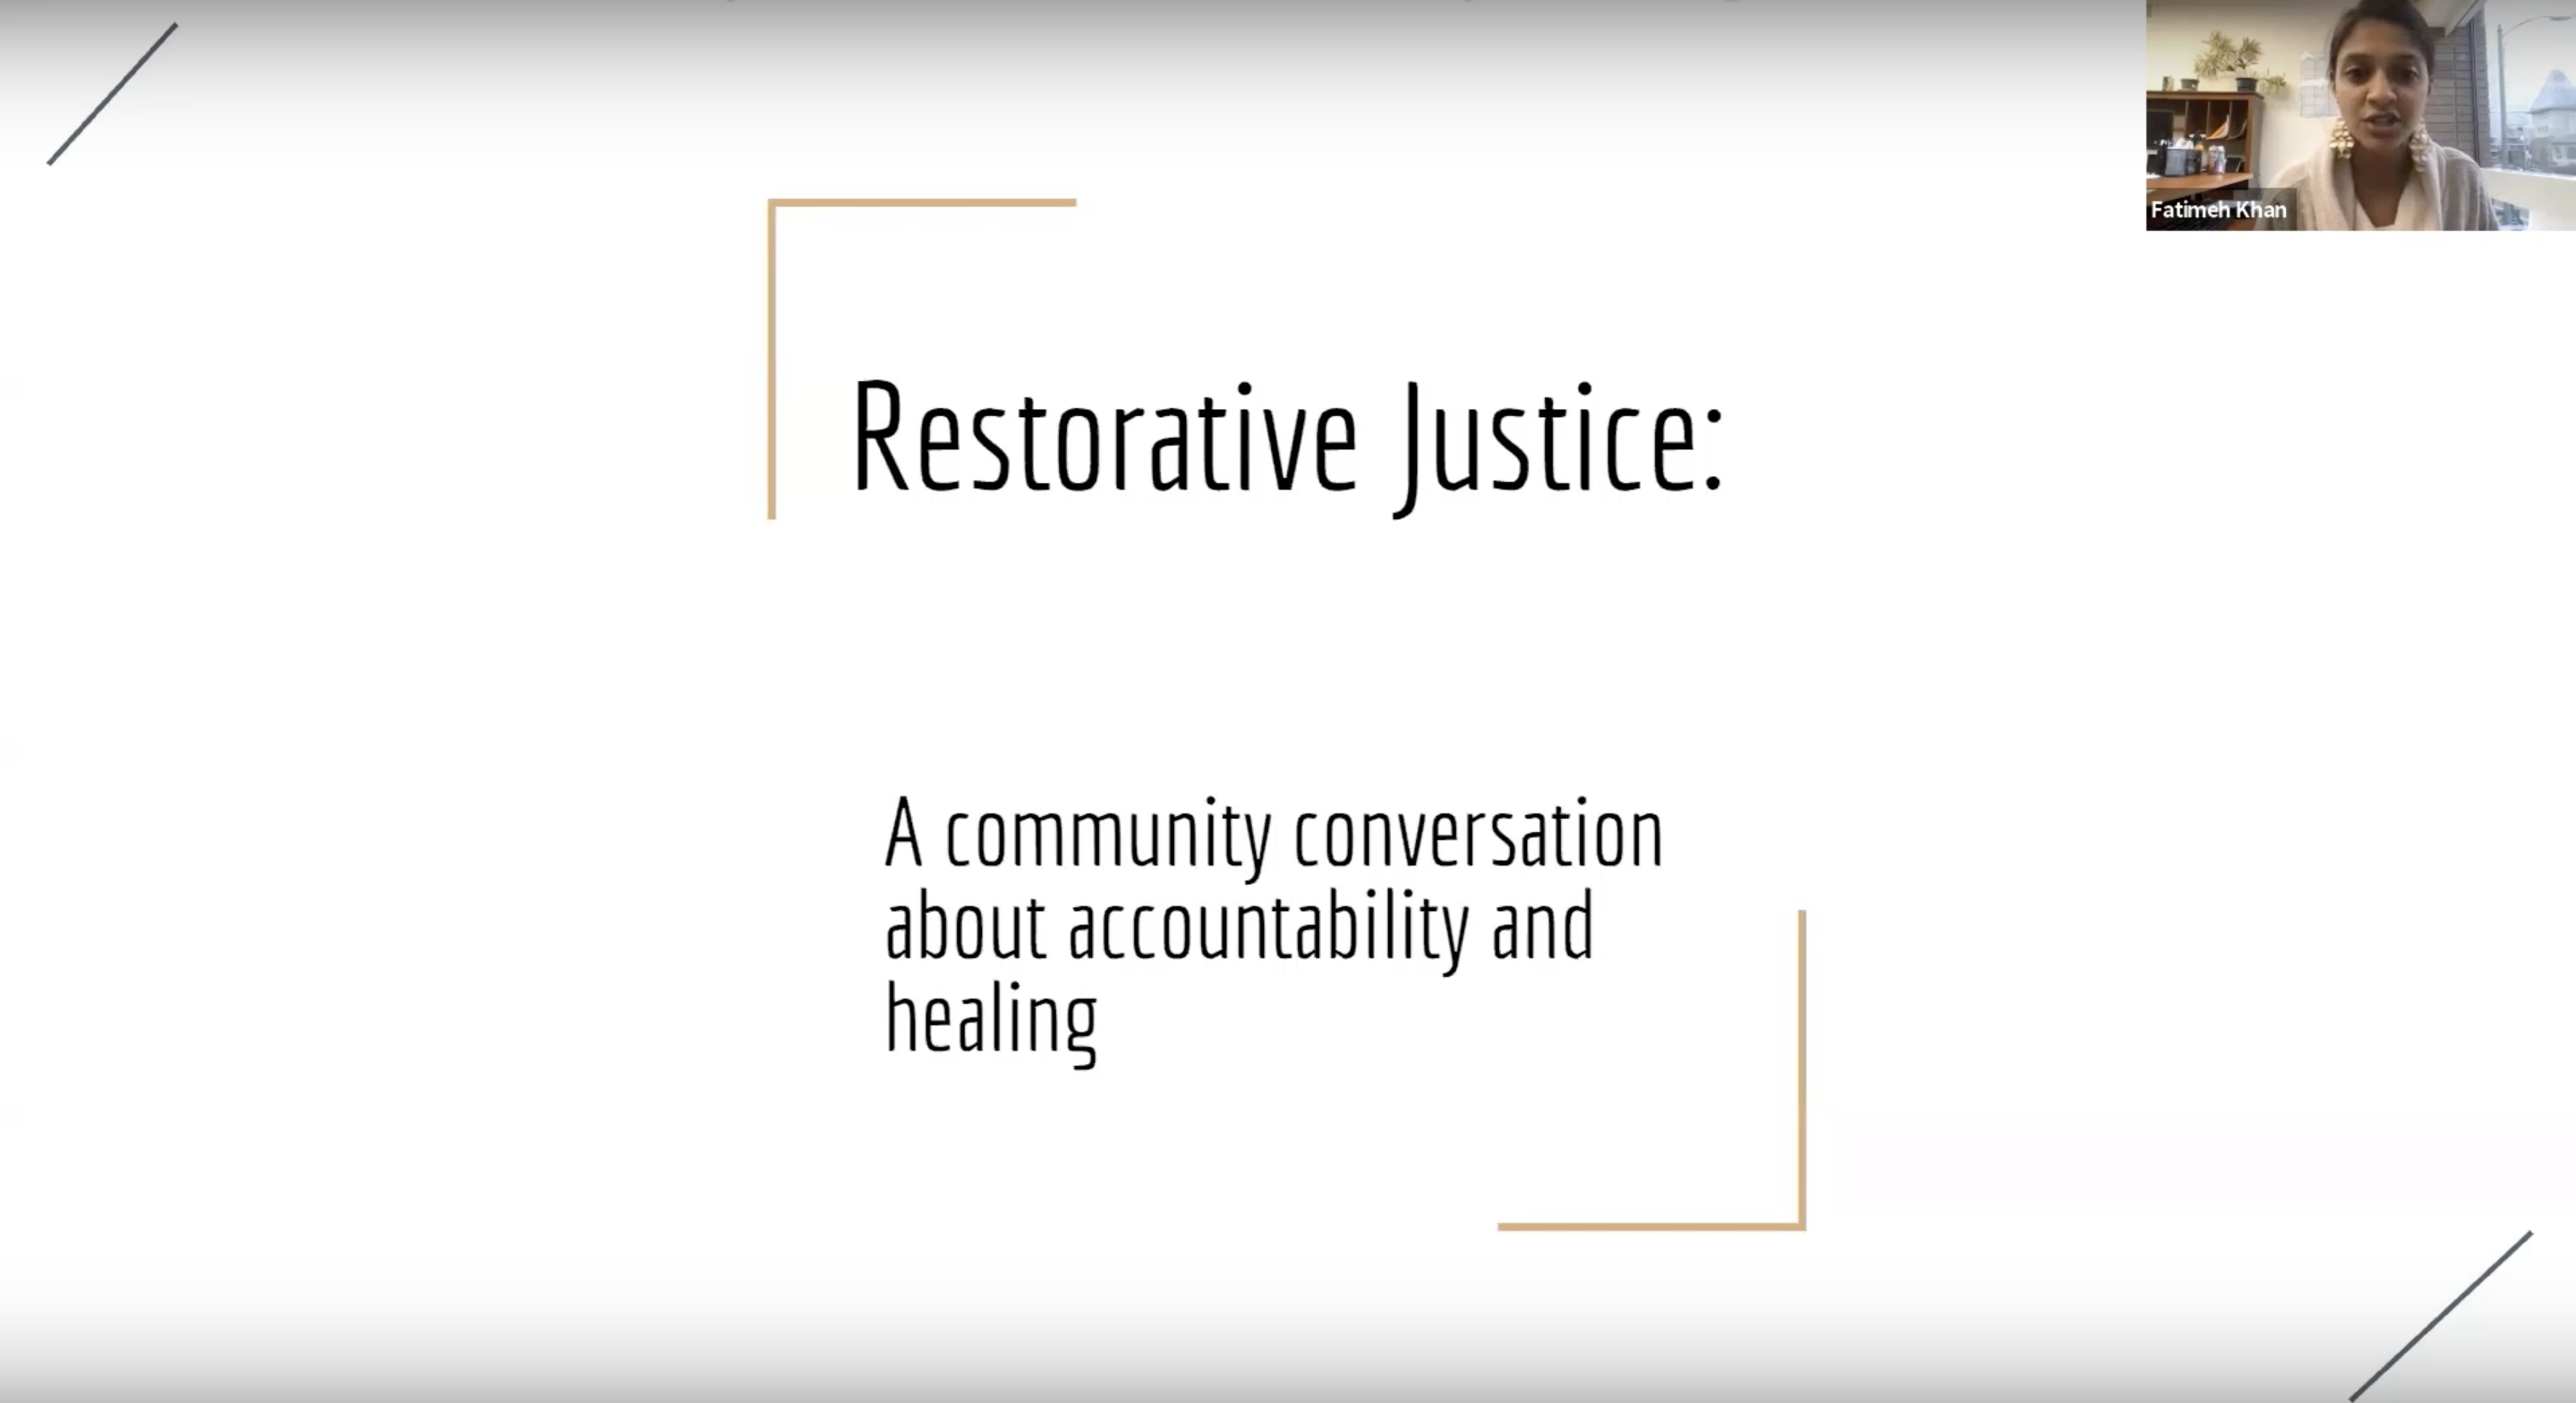 Preview image from Community Safety Beyond Policing webinar on Restorative Justice